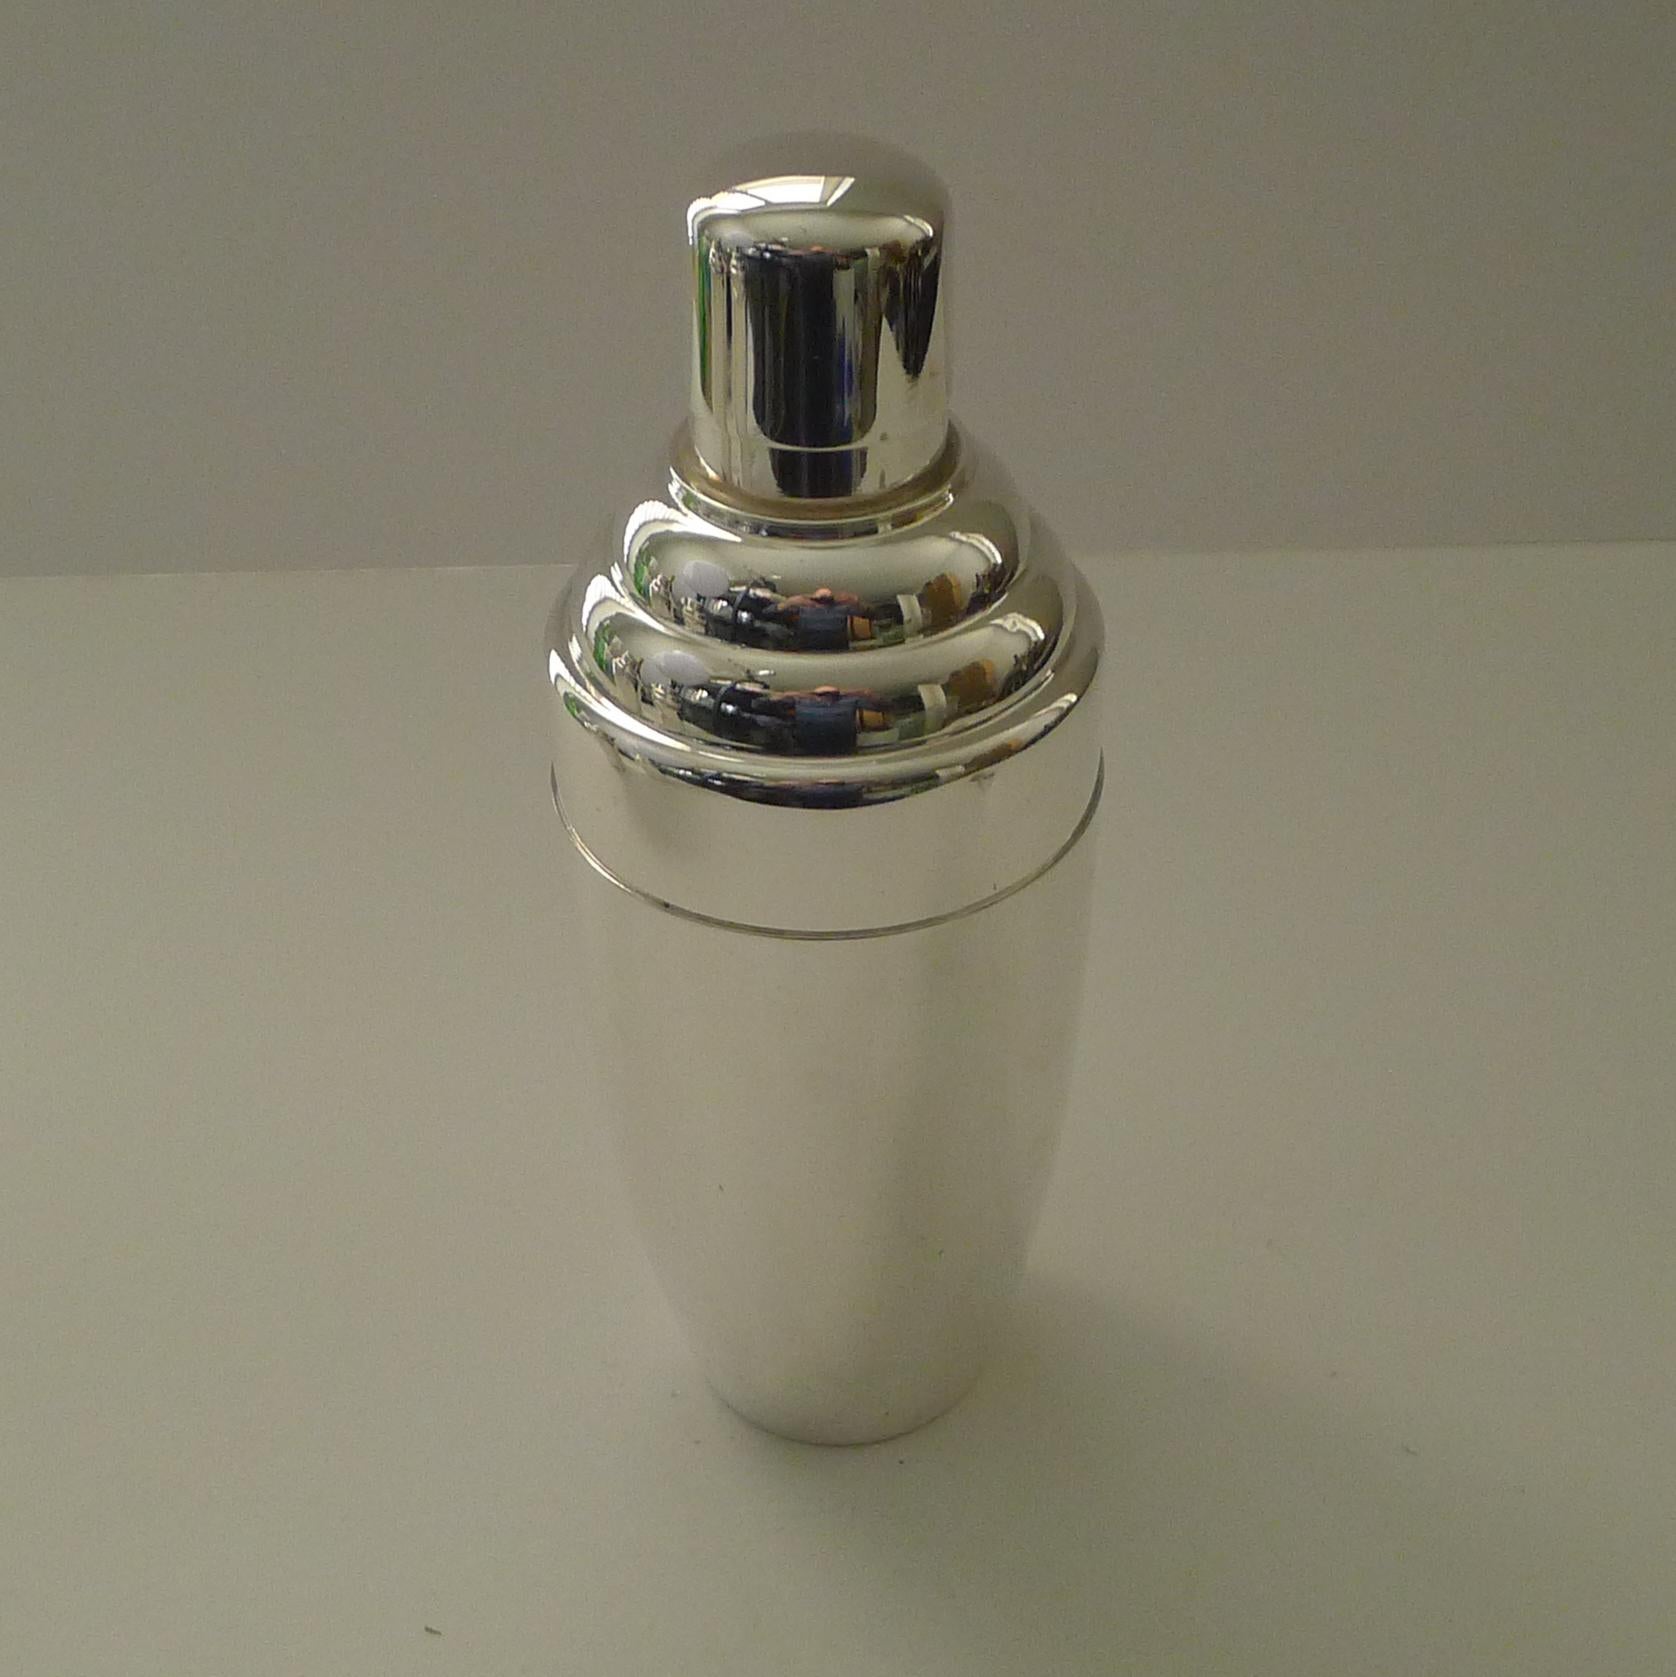 British Smart Art Deco Cocktail Shaker by Gaskell & Chambers, c.1940 For Sale